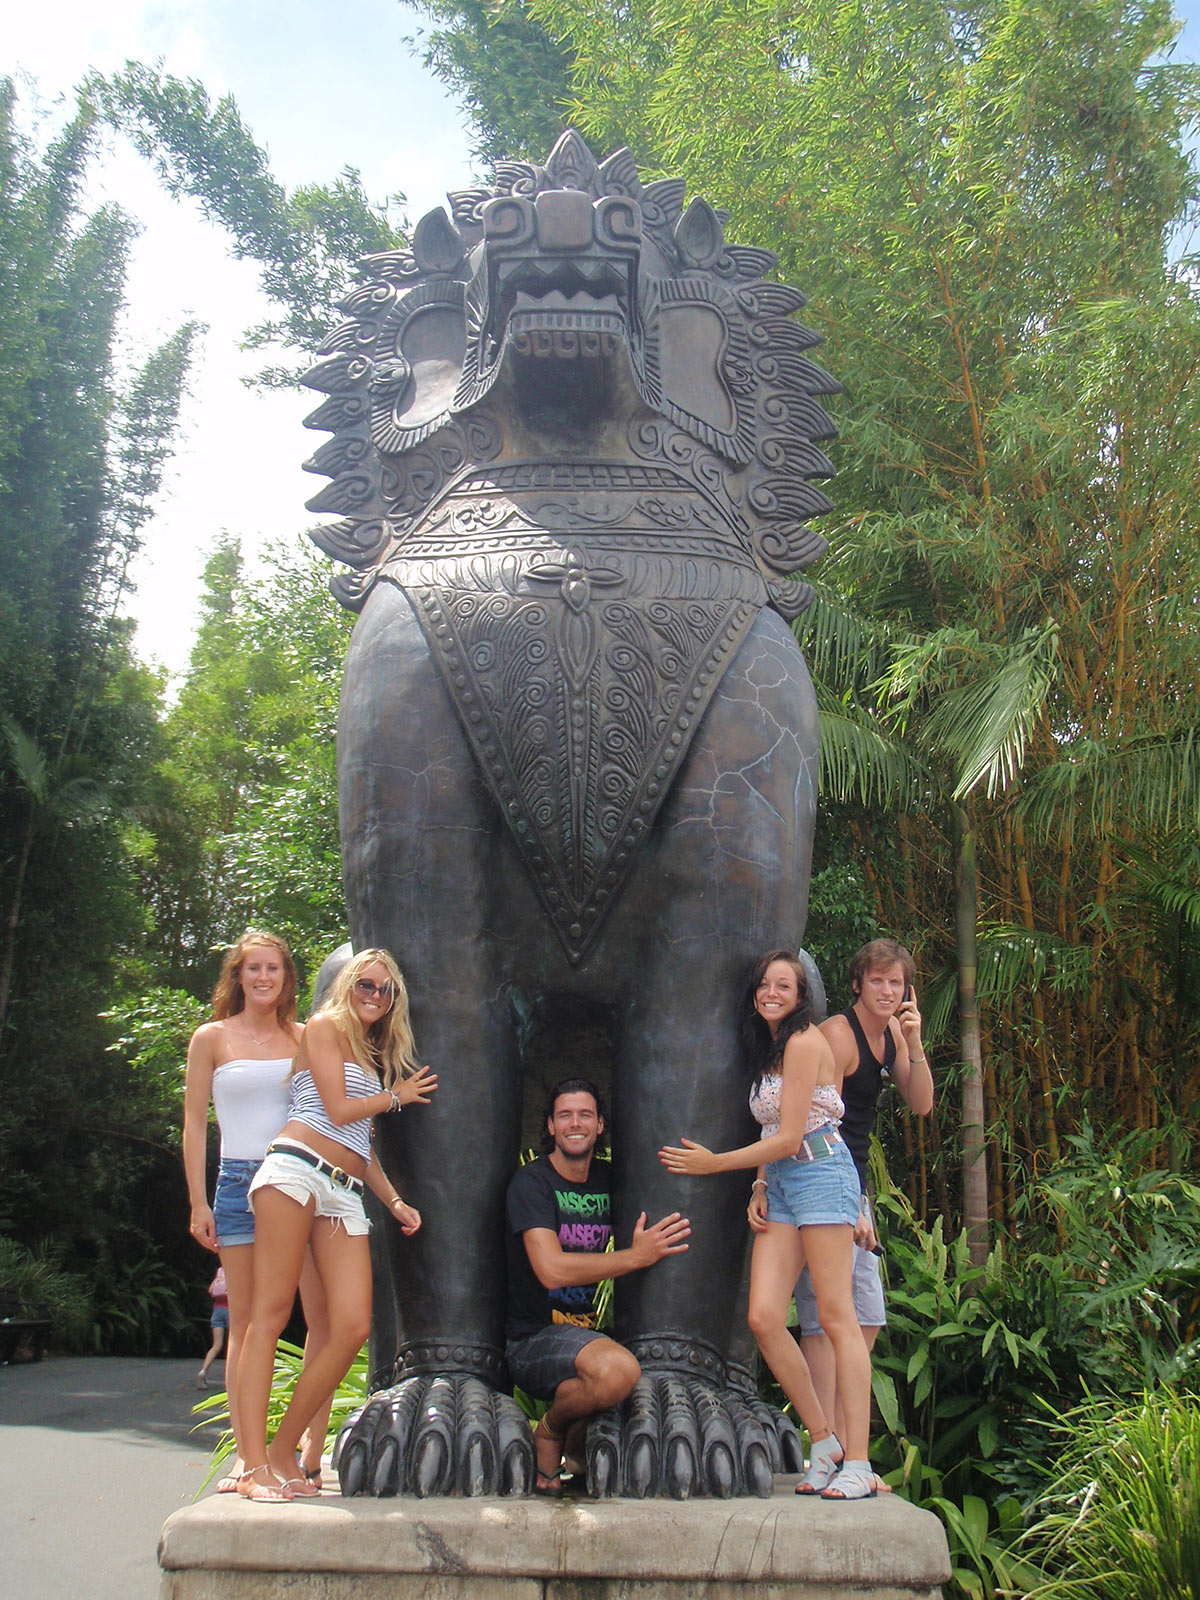 David Simpson with a guy and three girls near a giant statue at the zoo in Brissie. The Zoo, Brissie & Byron Bay